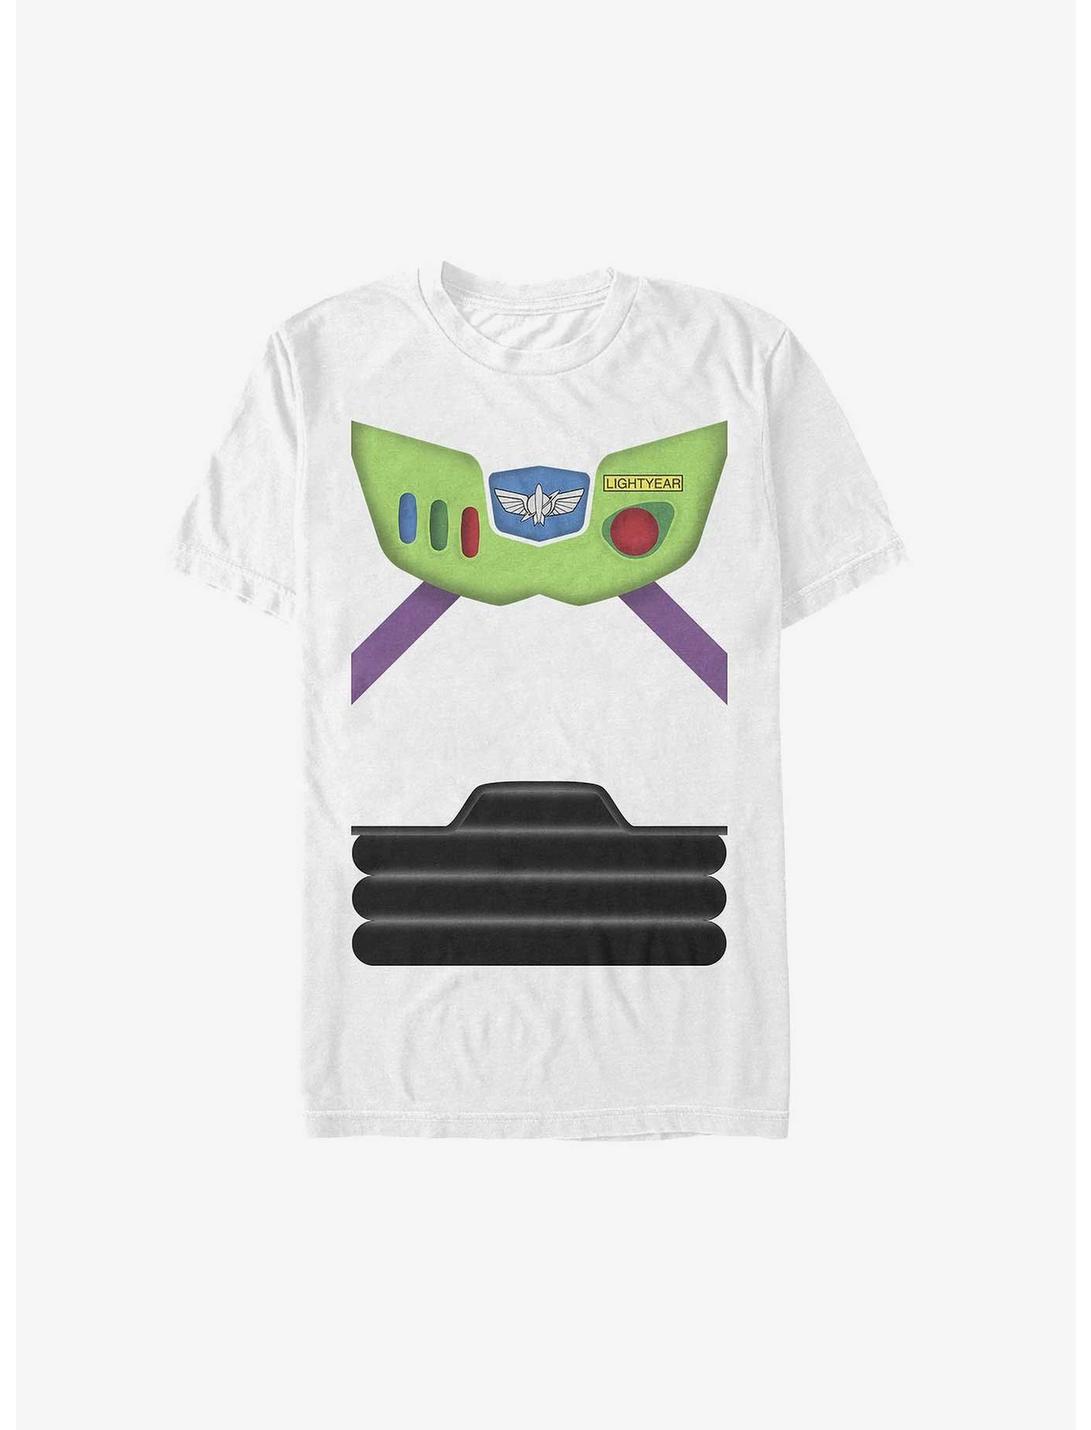 Disney Toy Story Buzz Lightyear Suit Cosplay T-Shirt, WHITE, hi-res